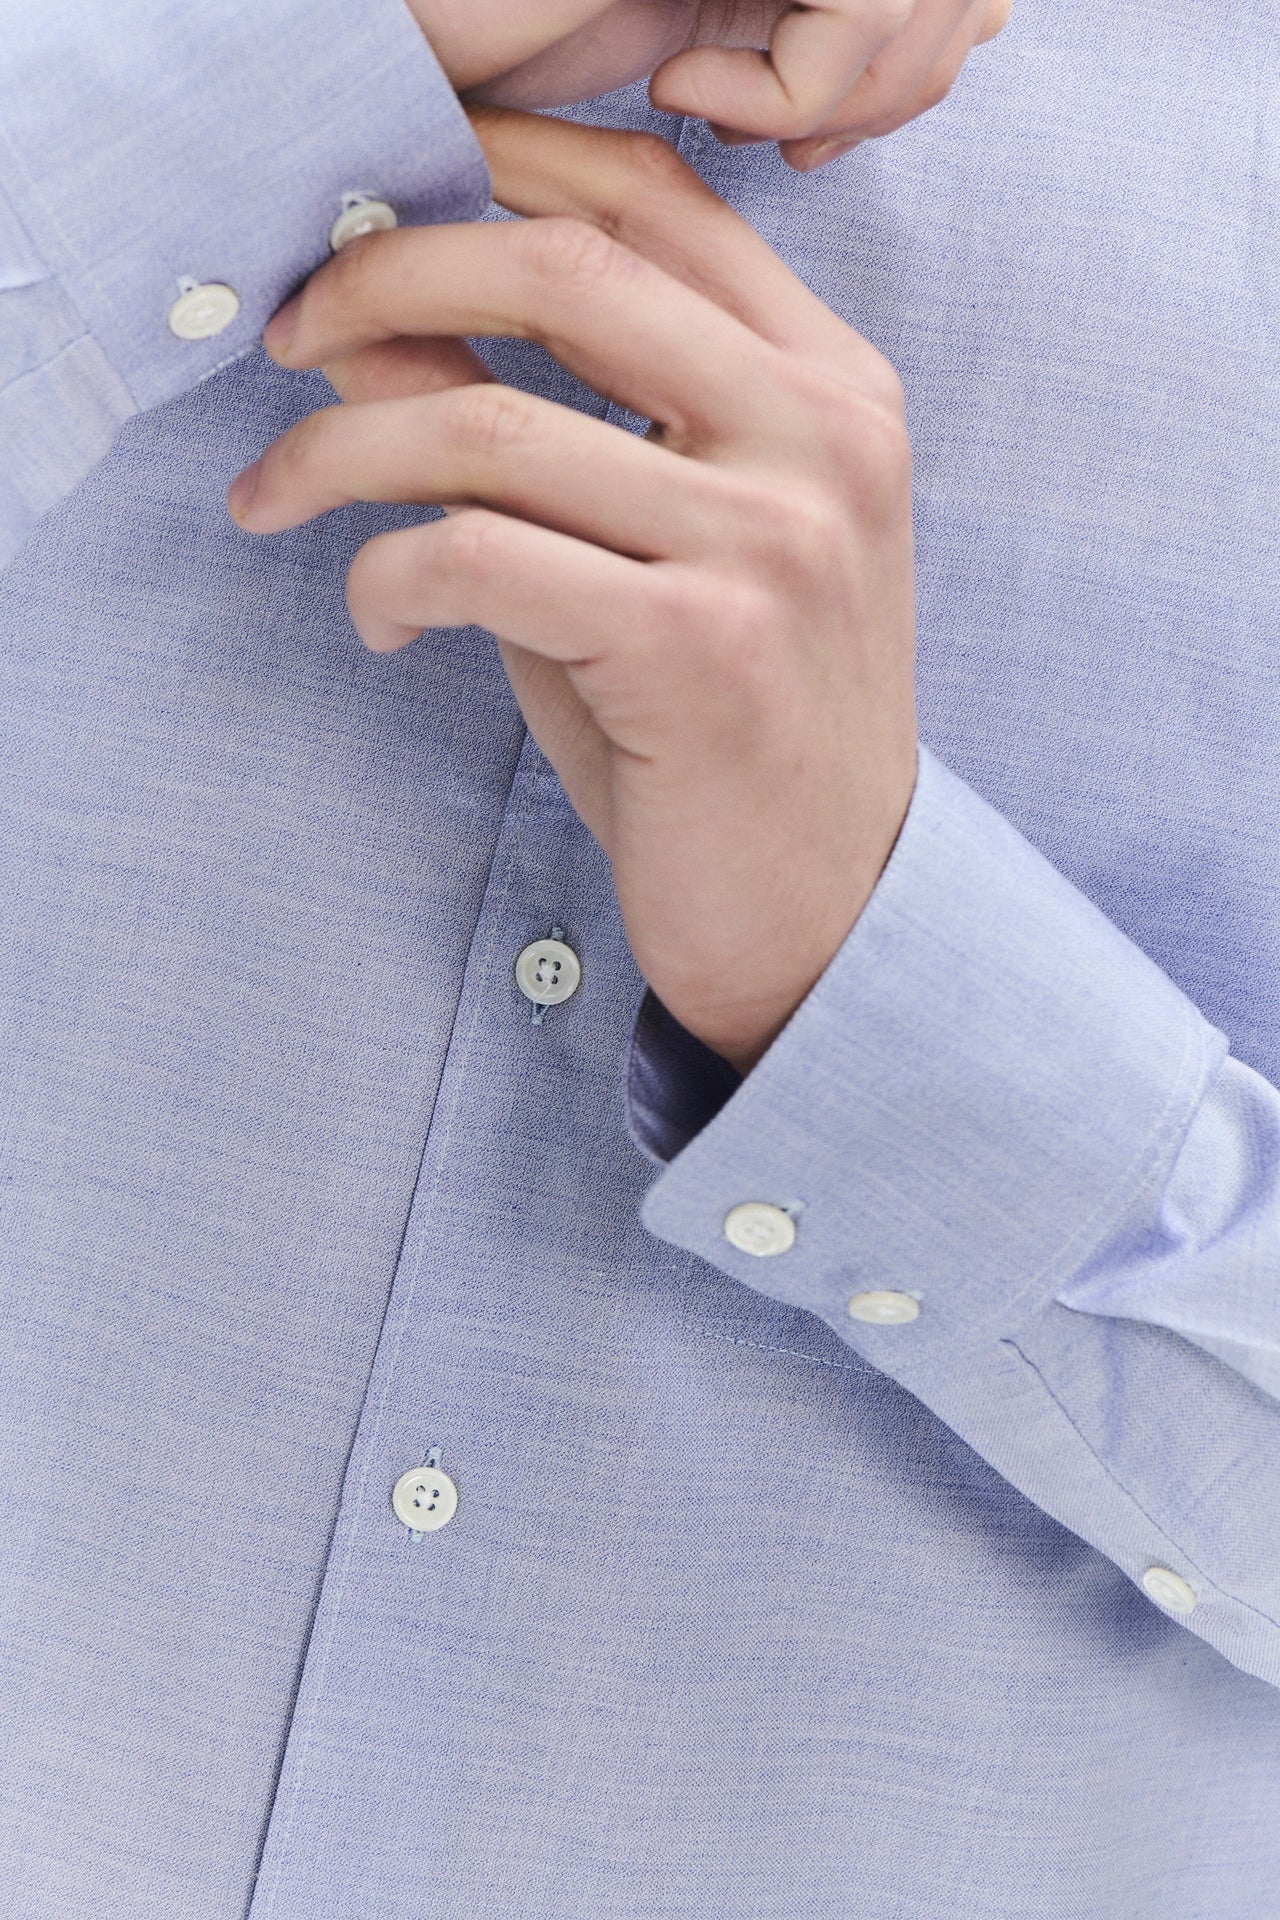 Feel Good Shirt in the Finest Mini Structure Lilac Pale Blue Italian Cotton by Albini